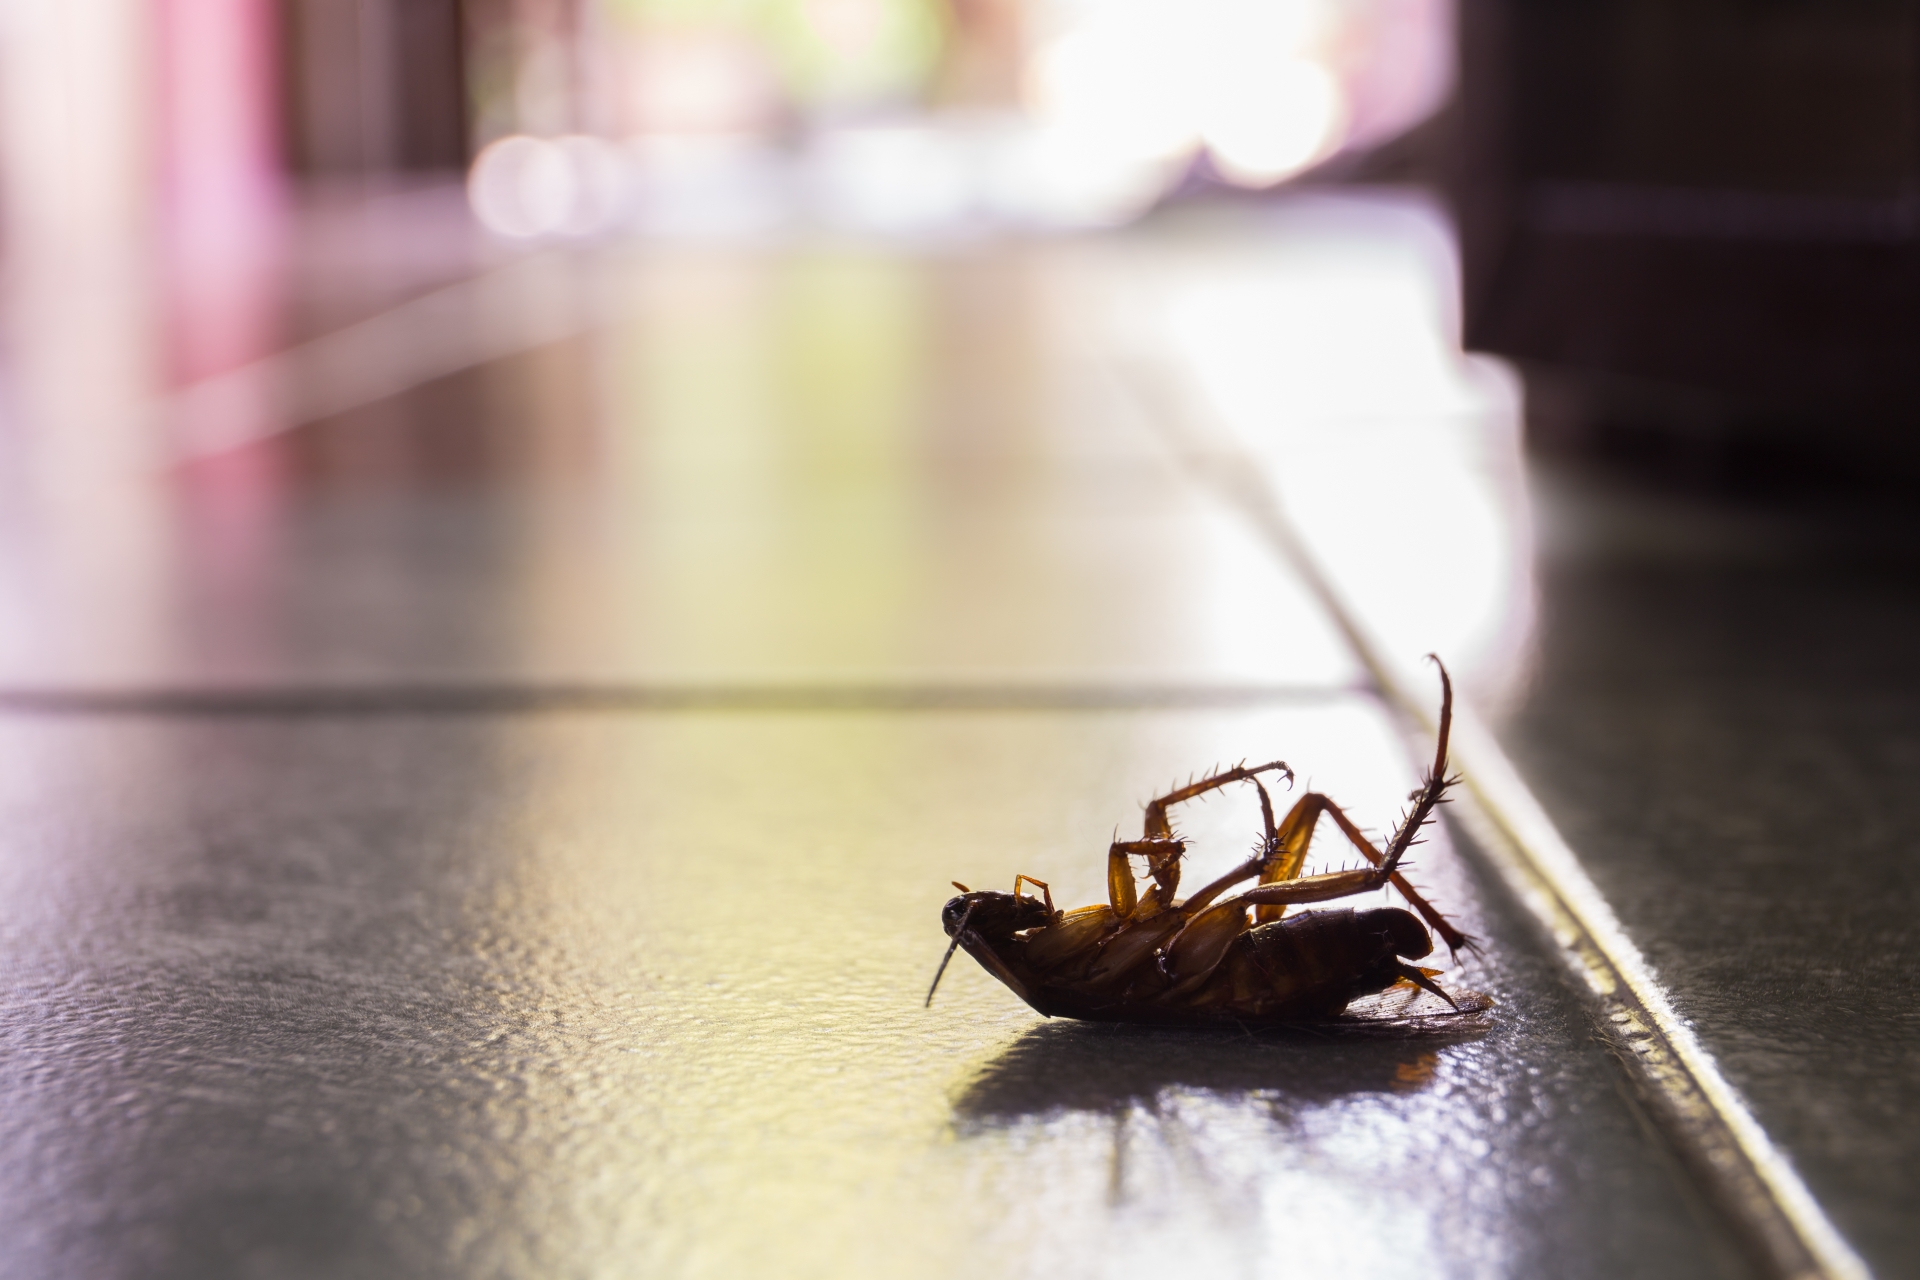 Cockroach Control, Pest Control in Leatherhead, Oxshott, Fetcham, KT22. Call Now 020 8166 9746